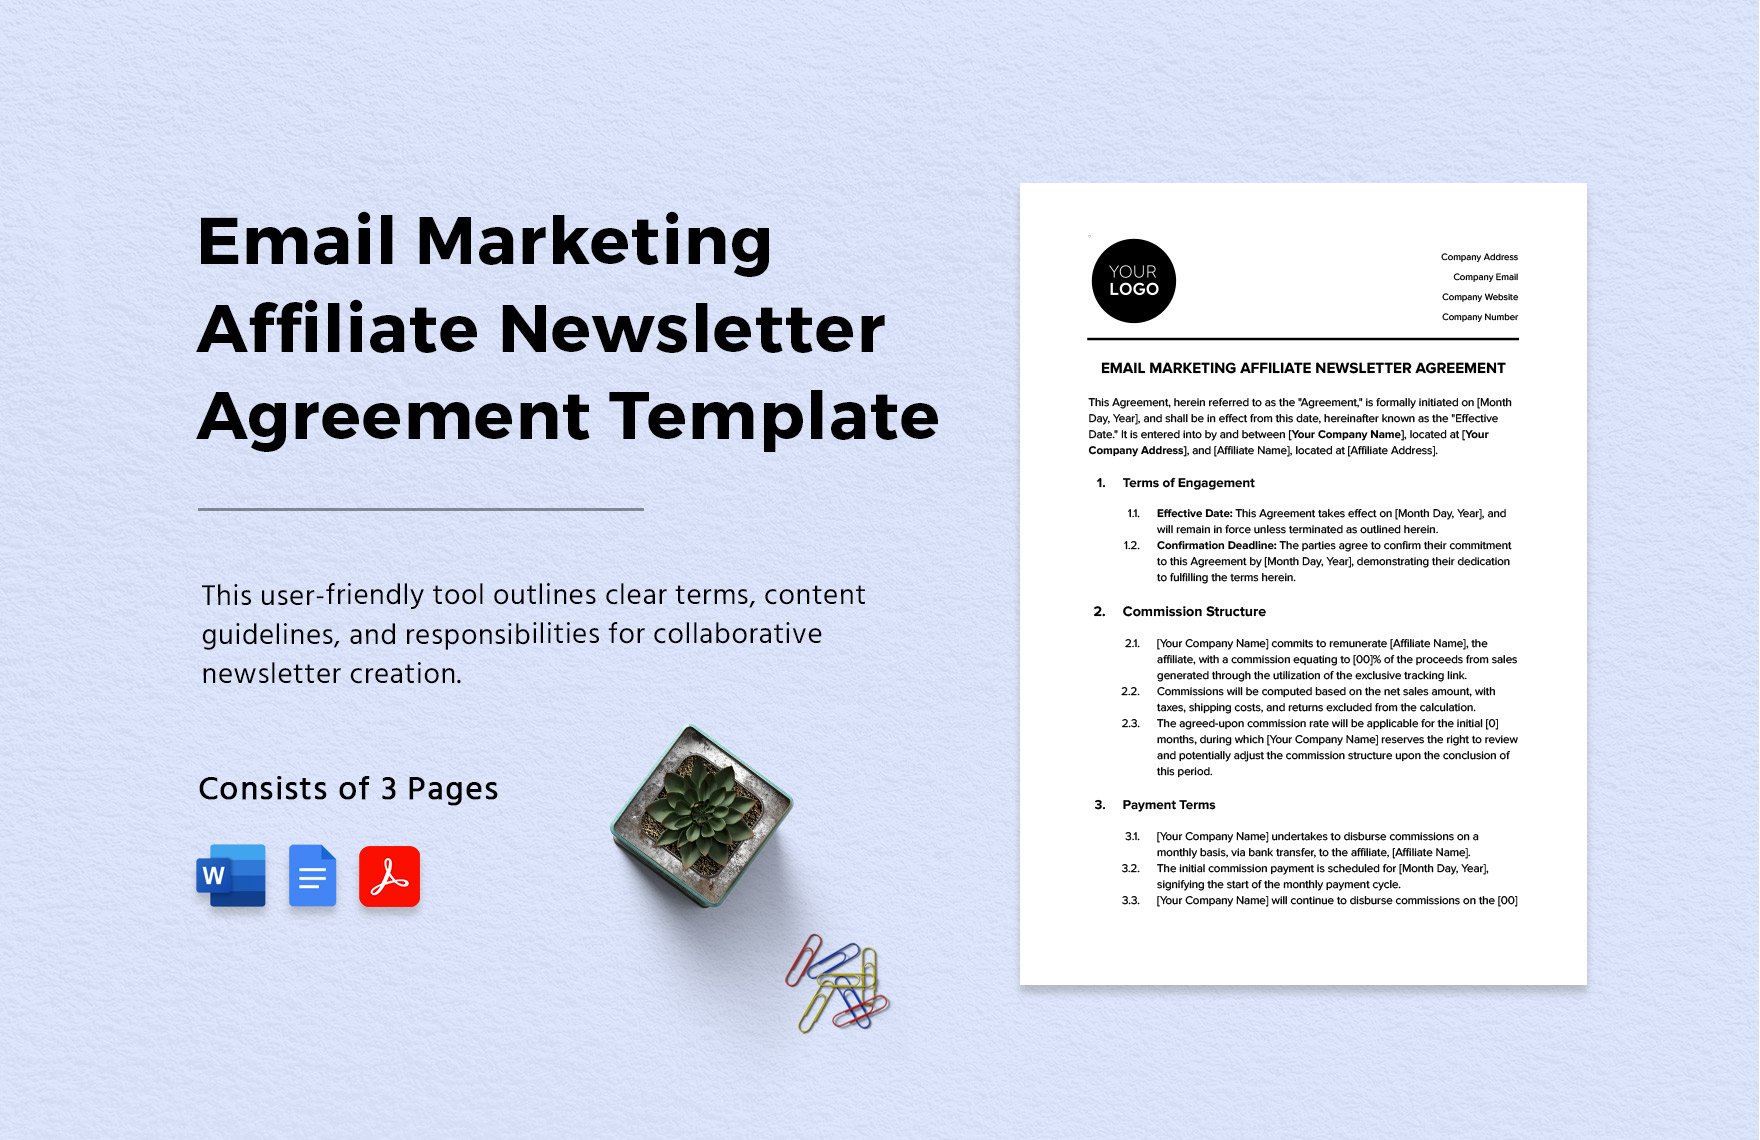 Email Marketing Affiliate Newsletter Agreement Template